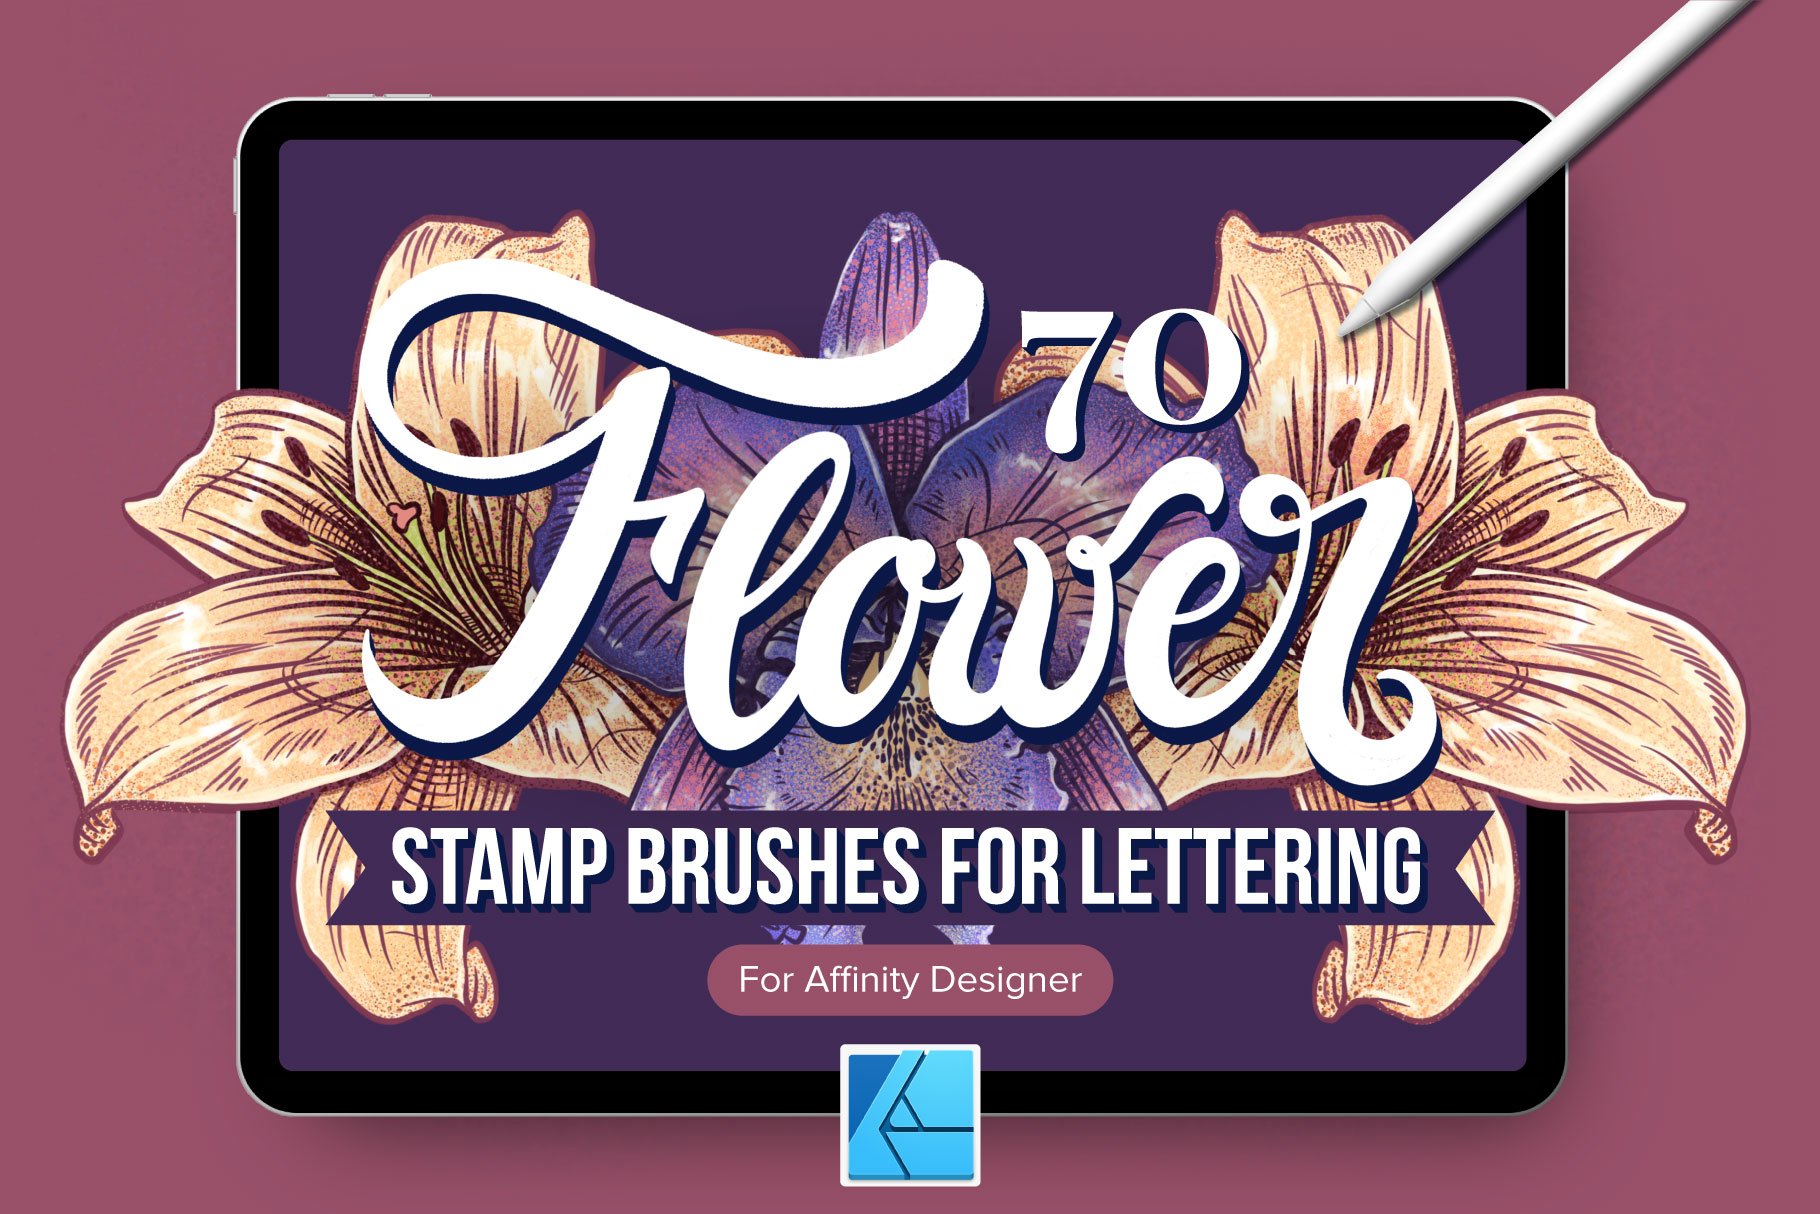 70 Flower Stamp Affinity Brushes cover image.